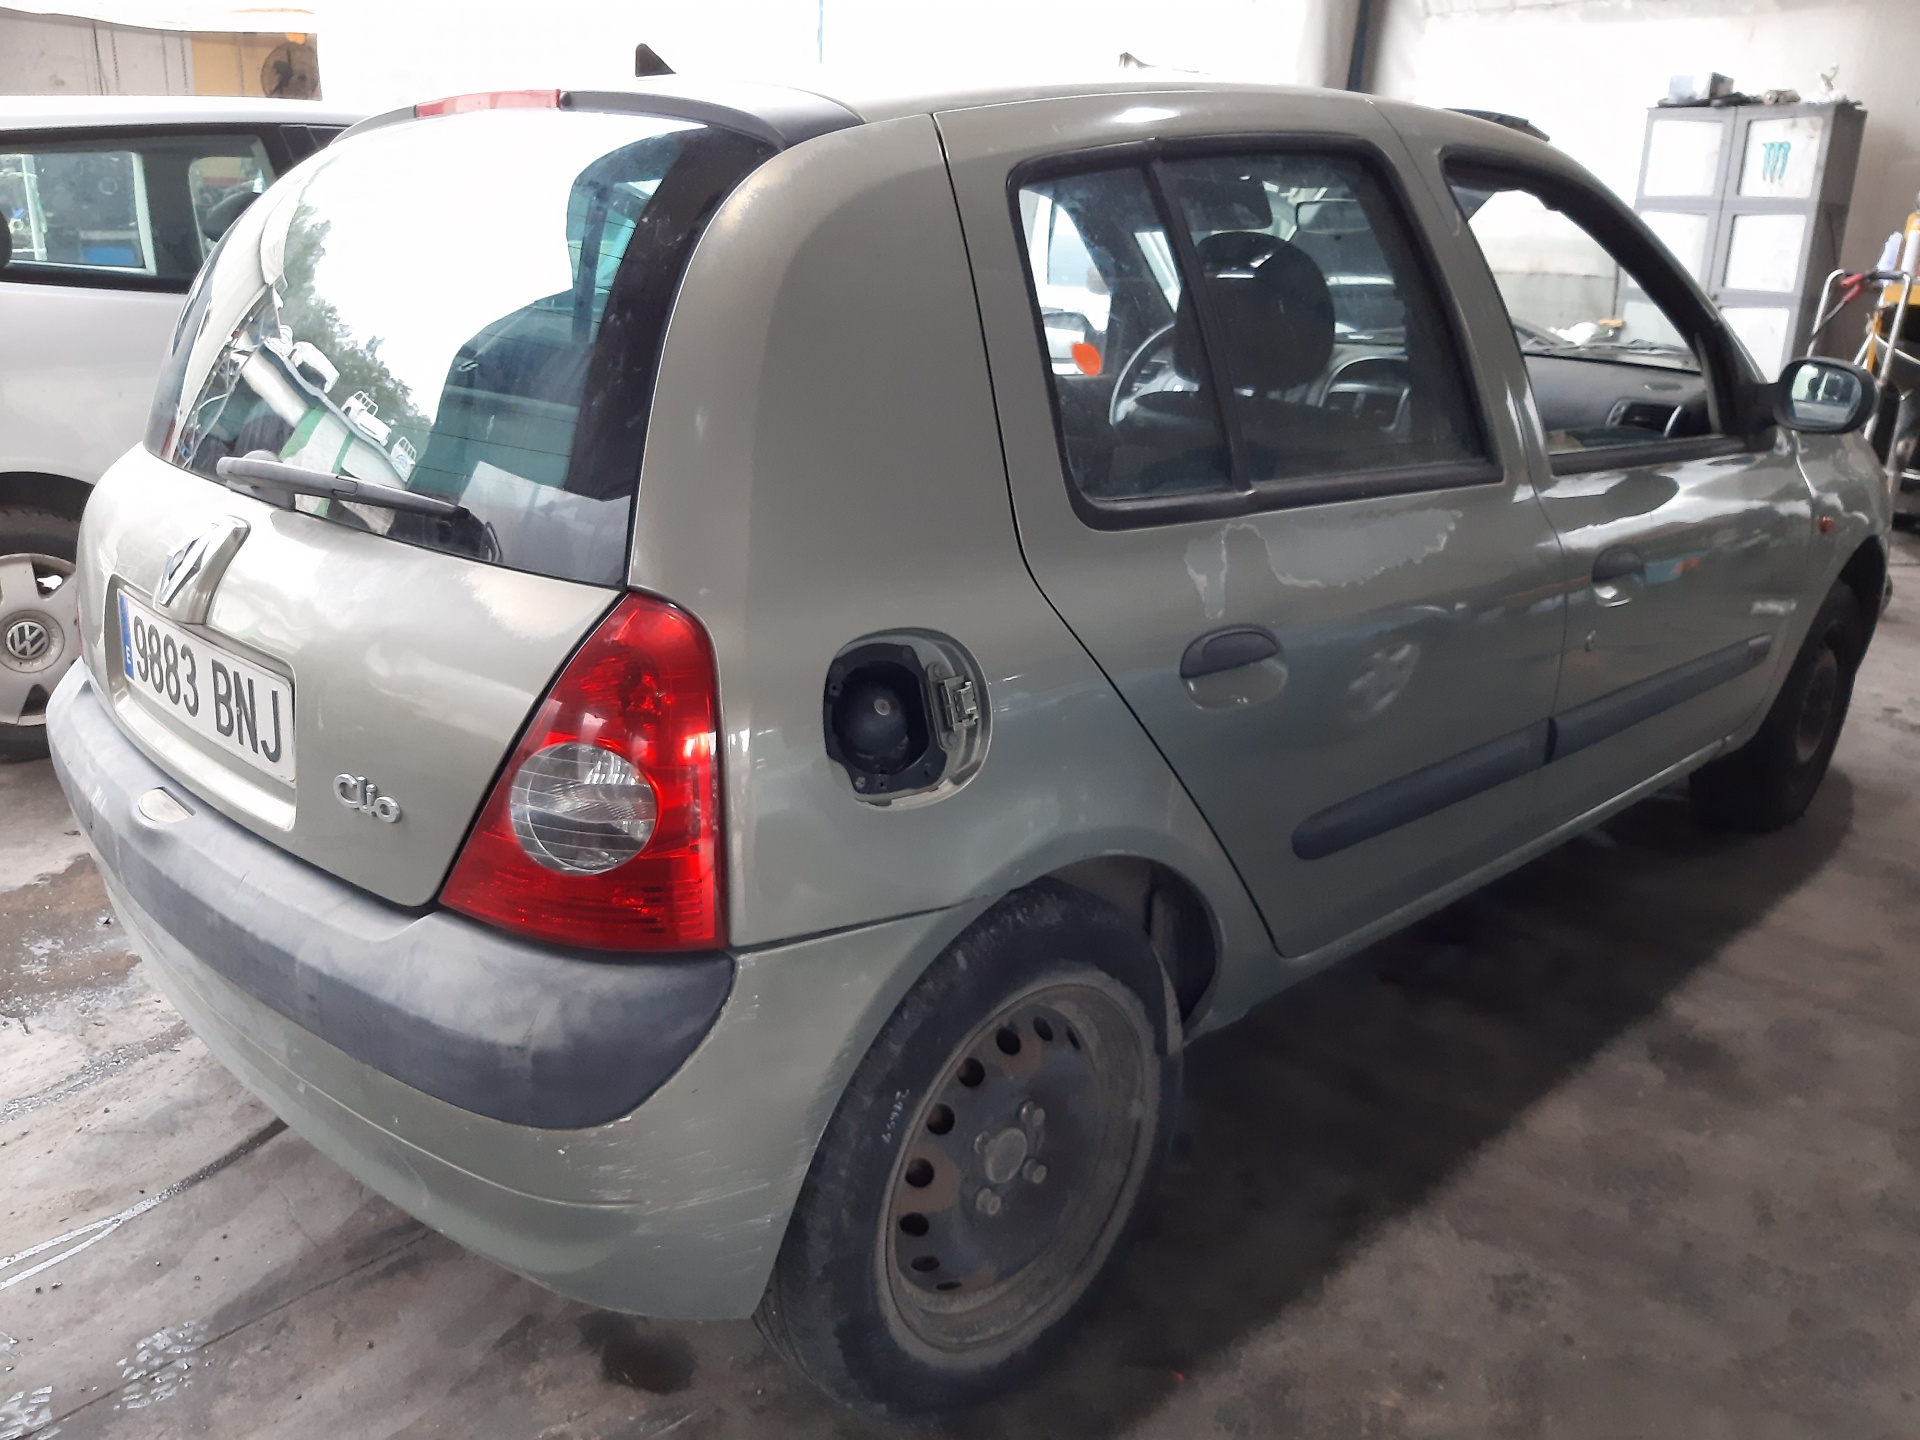 RENAULT Clio 3 generation (2005-2012) Other Body Parts 7700842256 22468889